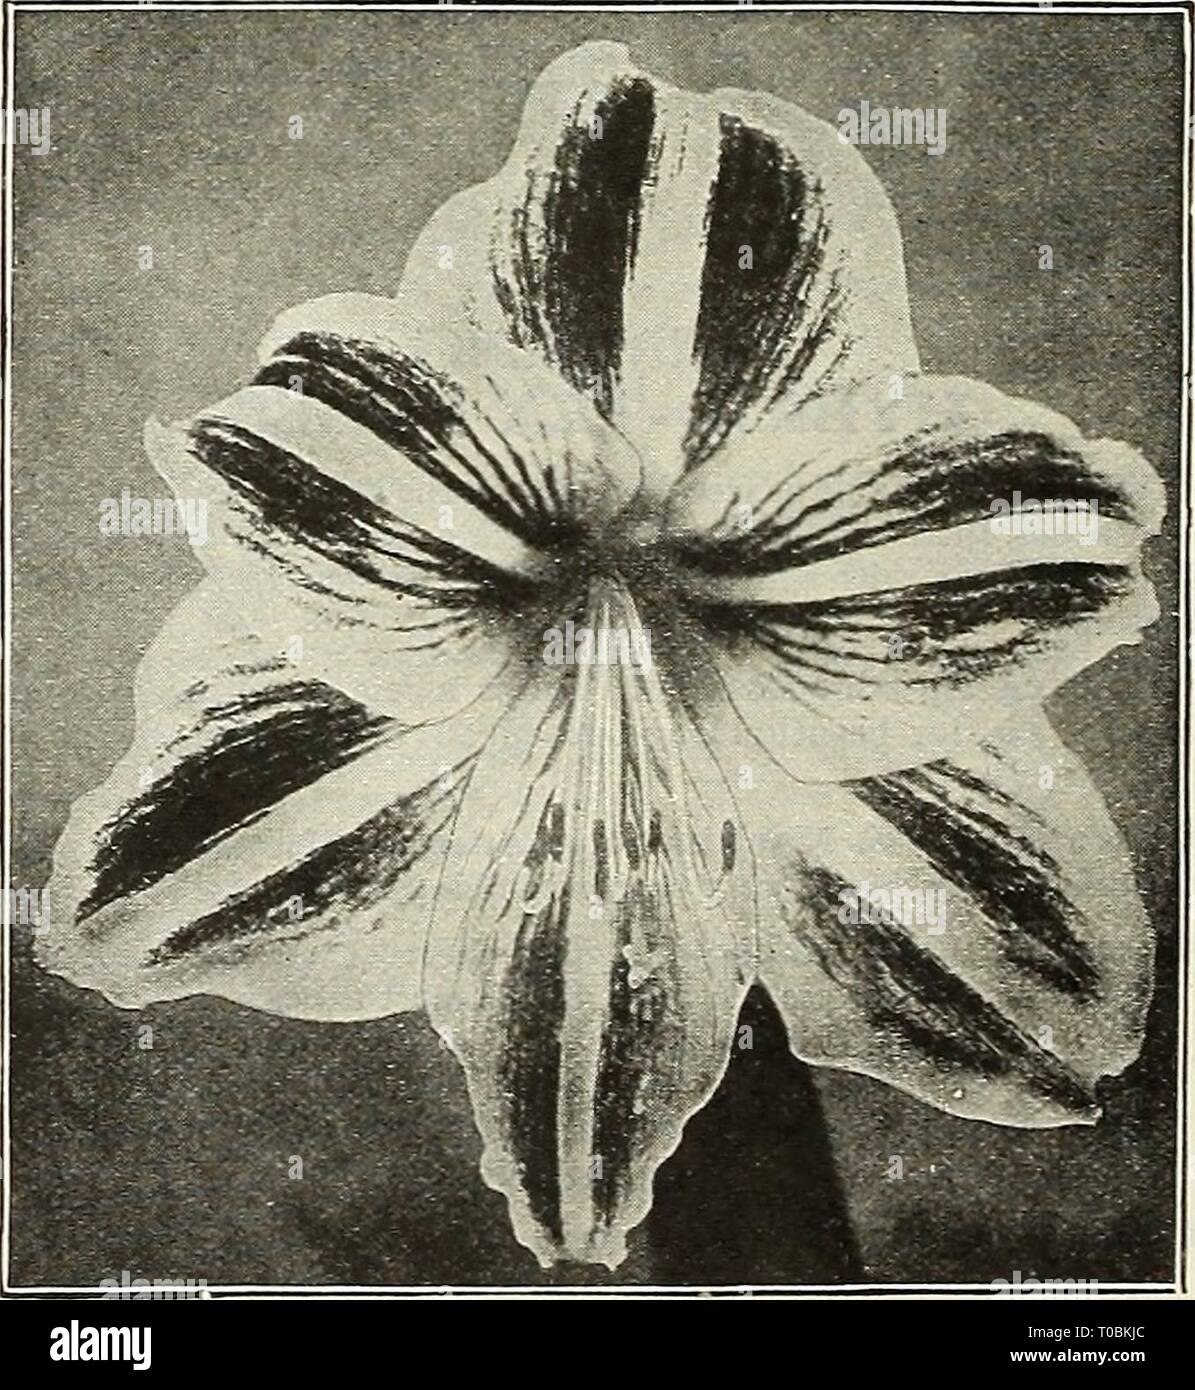 Dreer's garden book 1923 (1923) Dreer's garden book 1923 dreersgardenbook1923henr Year: 1923  Ag.^&gt;.N1HL'S U.mbell.tvs AGAPANTHUS UmbellatUS (BUte Lily of the Nile). A splendid ornamental plant, bearing clusters of bright, blue flowers on 3 foot long flower stalks and lasting a long time in bloom. A most desirable plant for outdoor decoration, planted in large pots or tubs on the lawn or piazza. 50 cts. each. Also a limited number of large plants in 8-inch tubs, $2.50 each. — Mooreanus. A smaller form than the type with dark-blue flowers; produced very freely. 50 cts. each. AGLAONEMA Cost Stock Photo